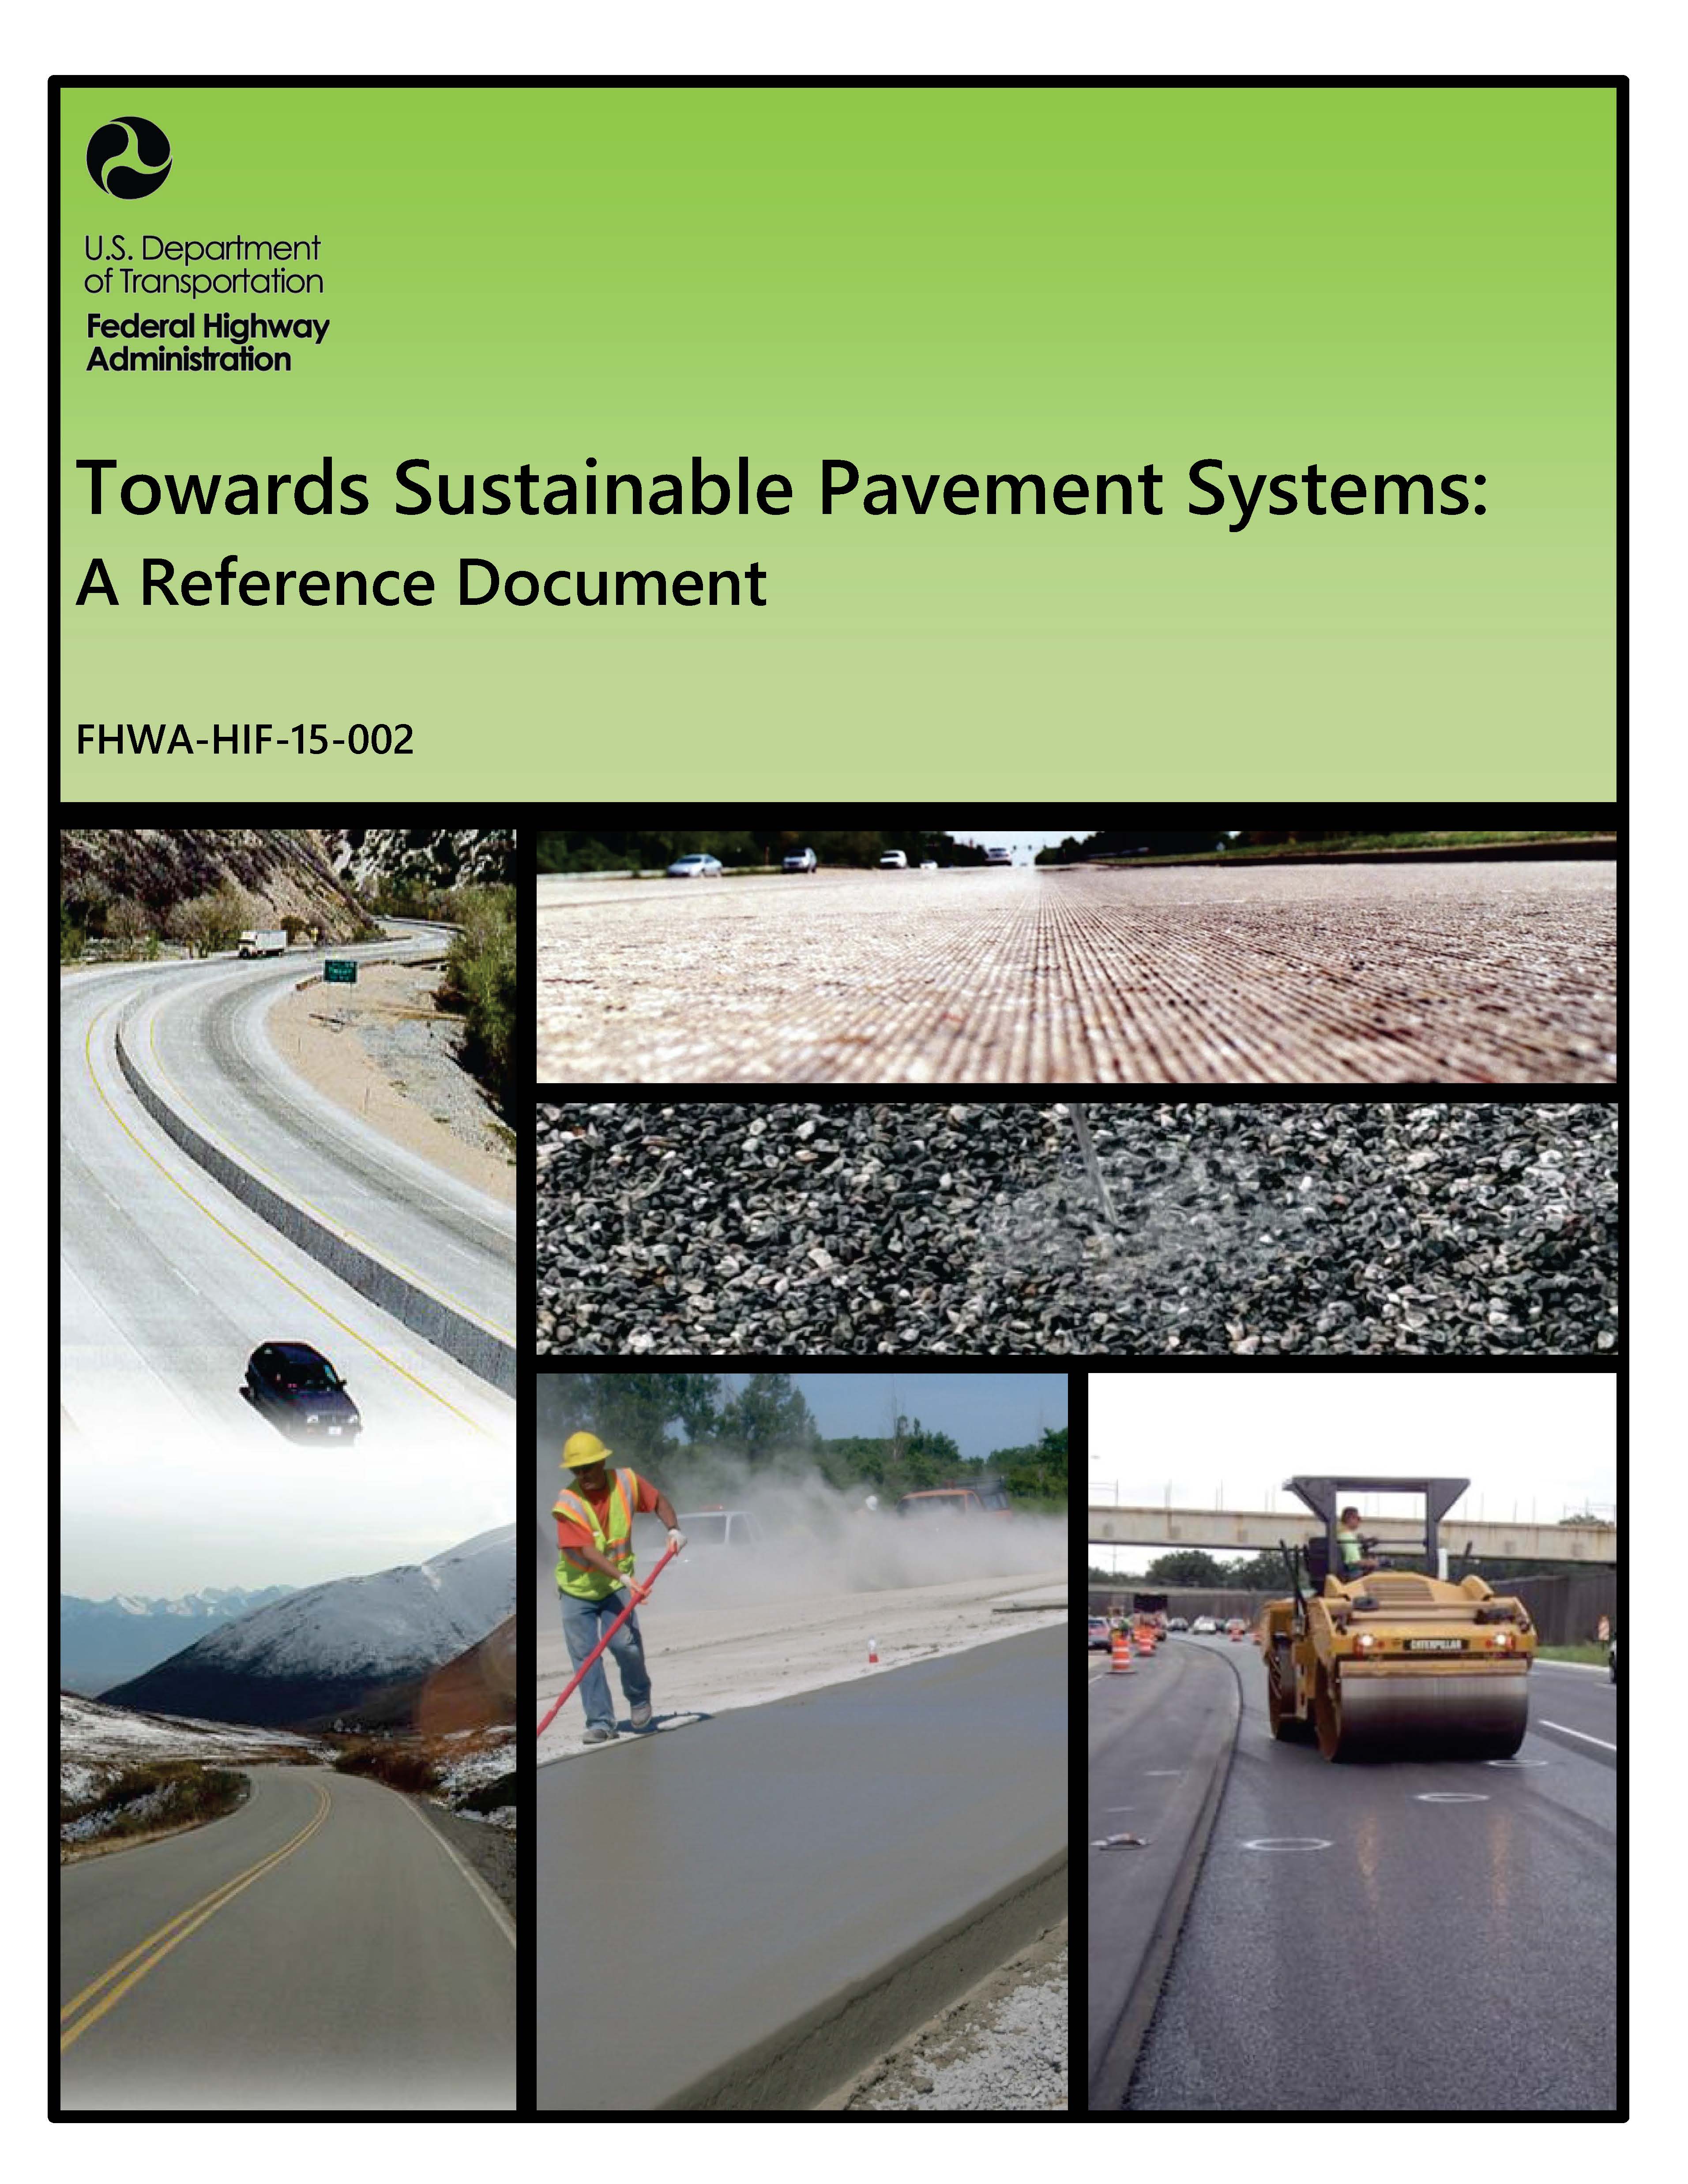 Towards Sustainable Pavement Systems: A Reference Document